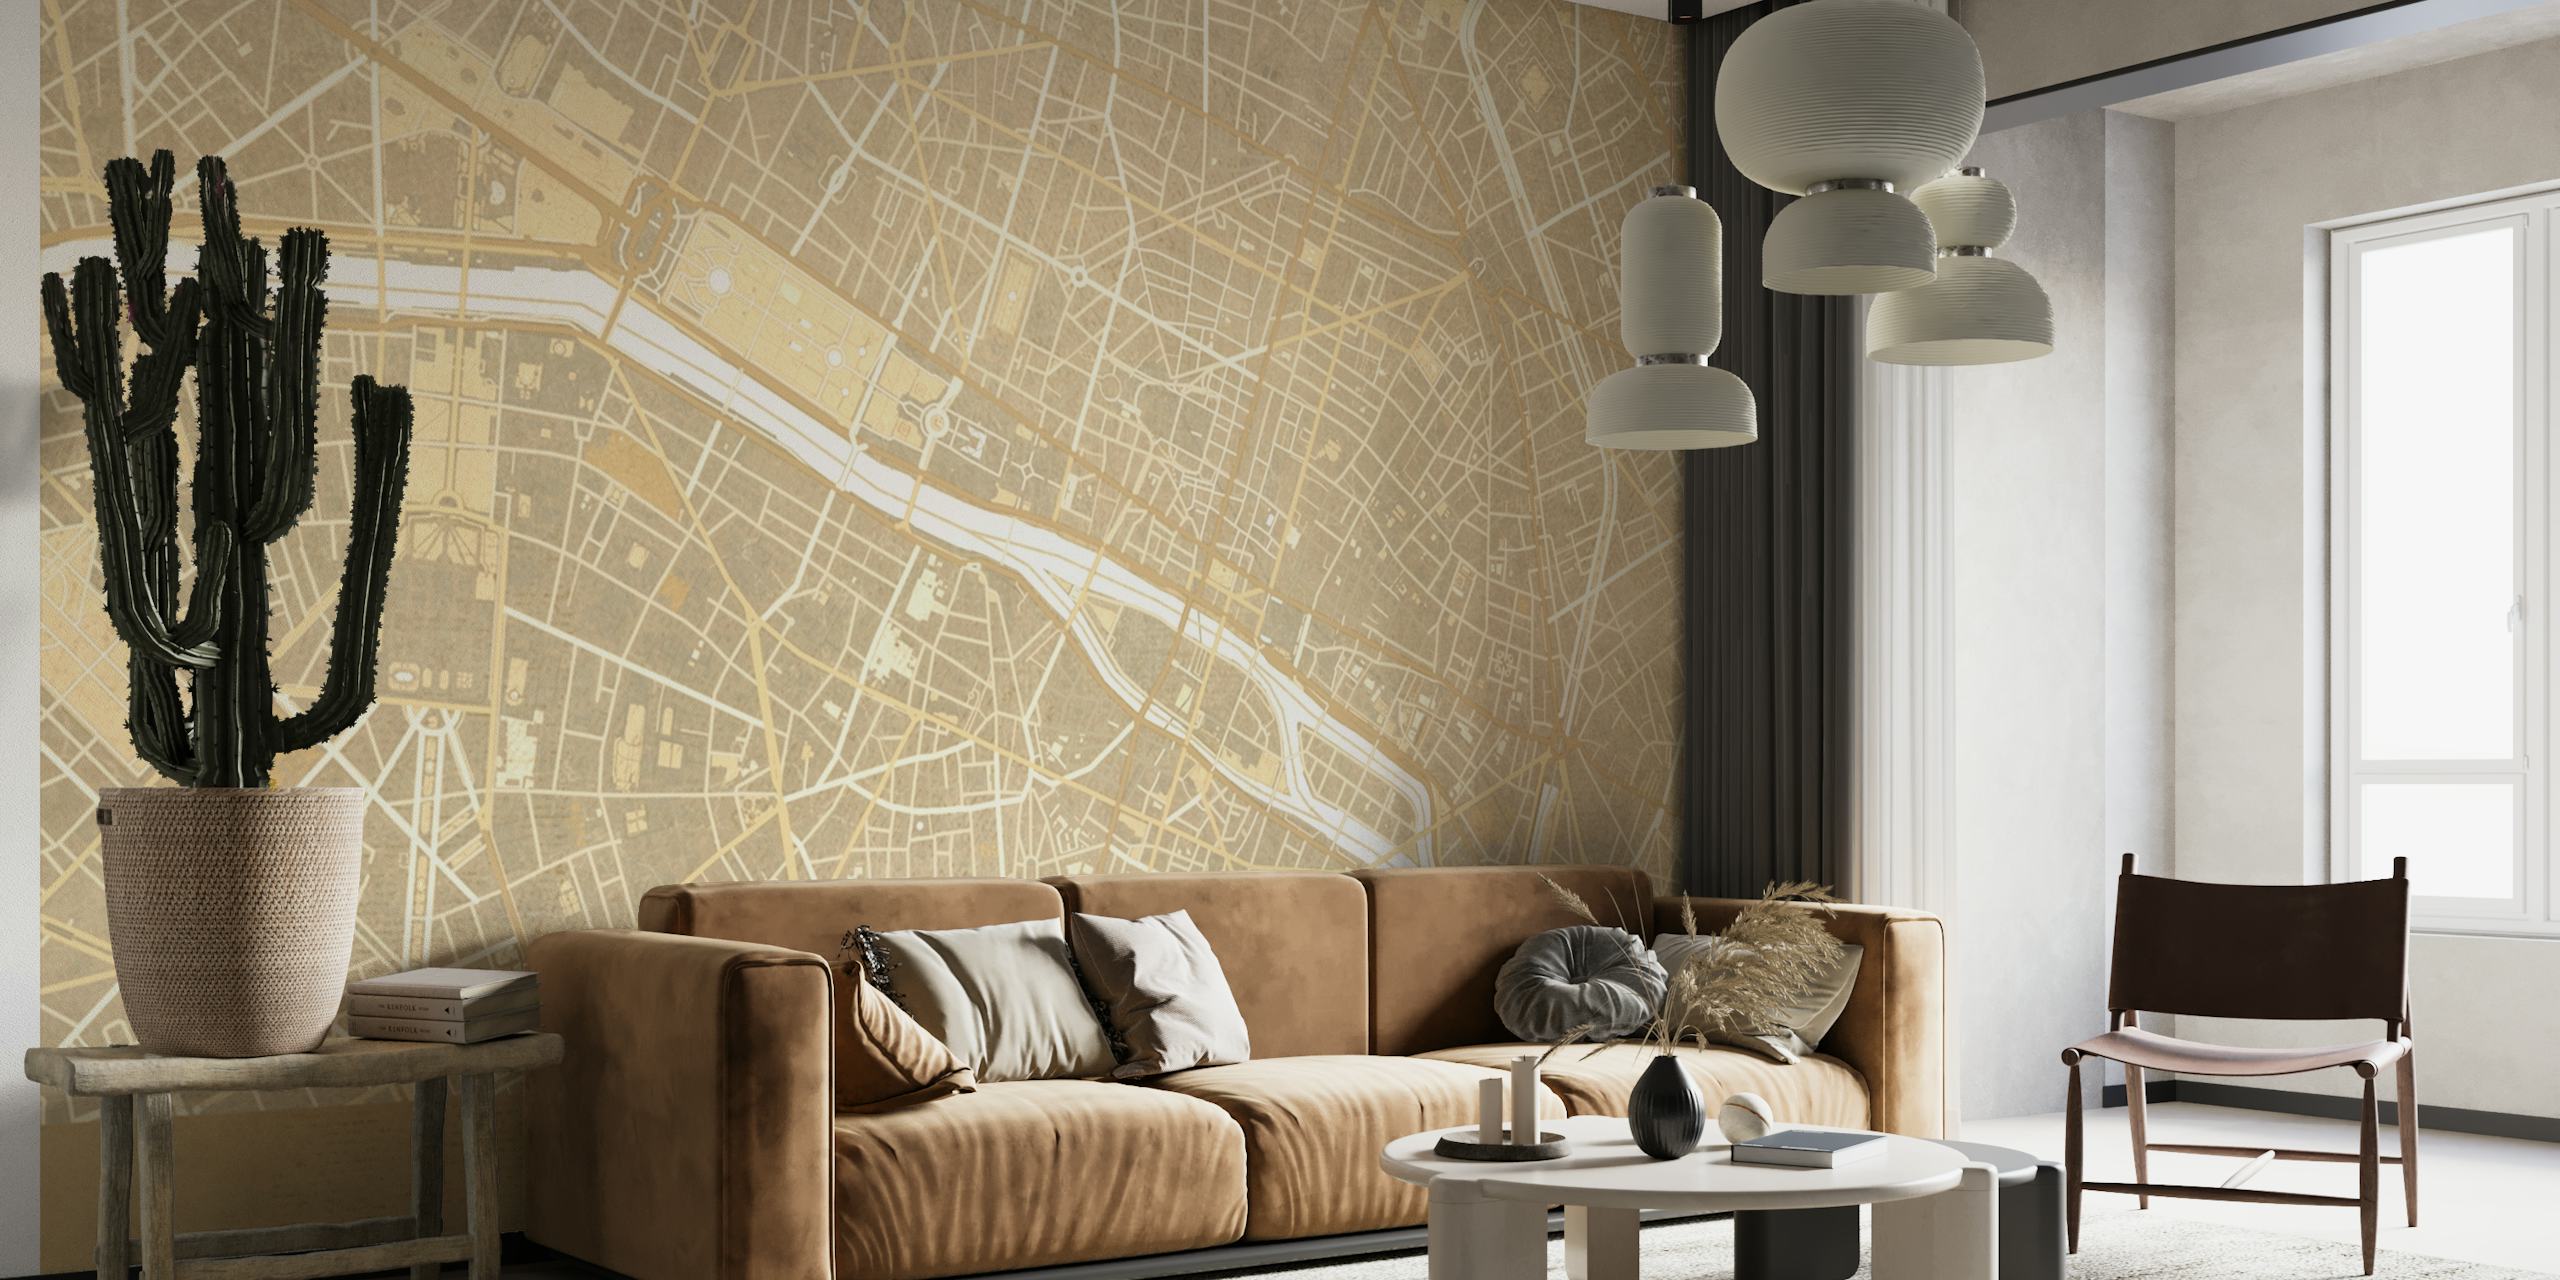 Sepia-toned vintage map of Paris, France for wall mural